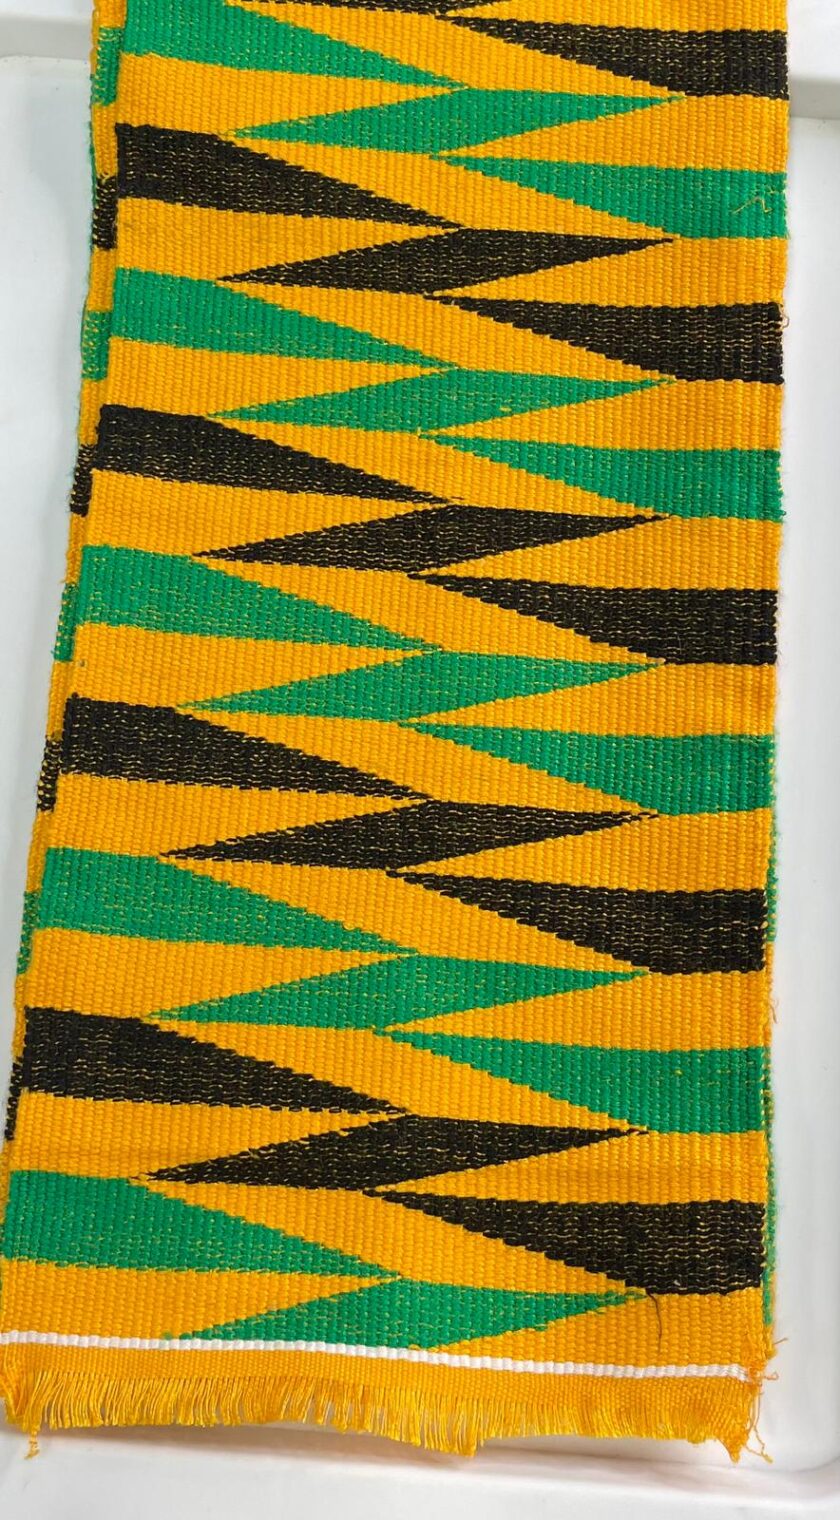 Our authentic hand woven African Kente Muffler or Stole in Jamaican flag colours and Afriican print pattern.